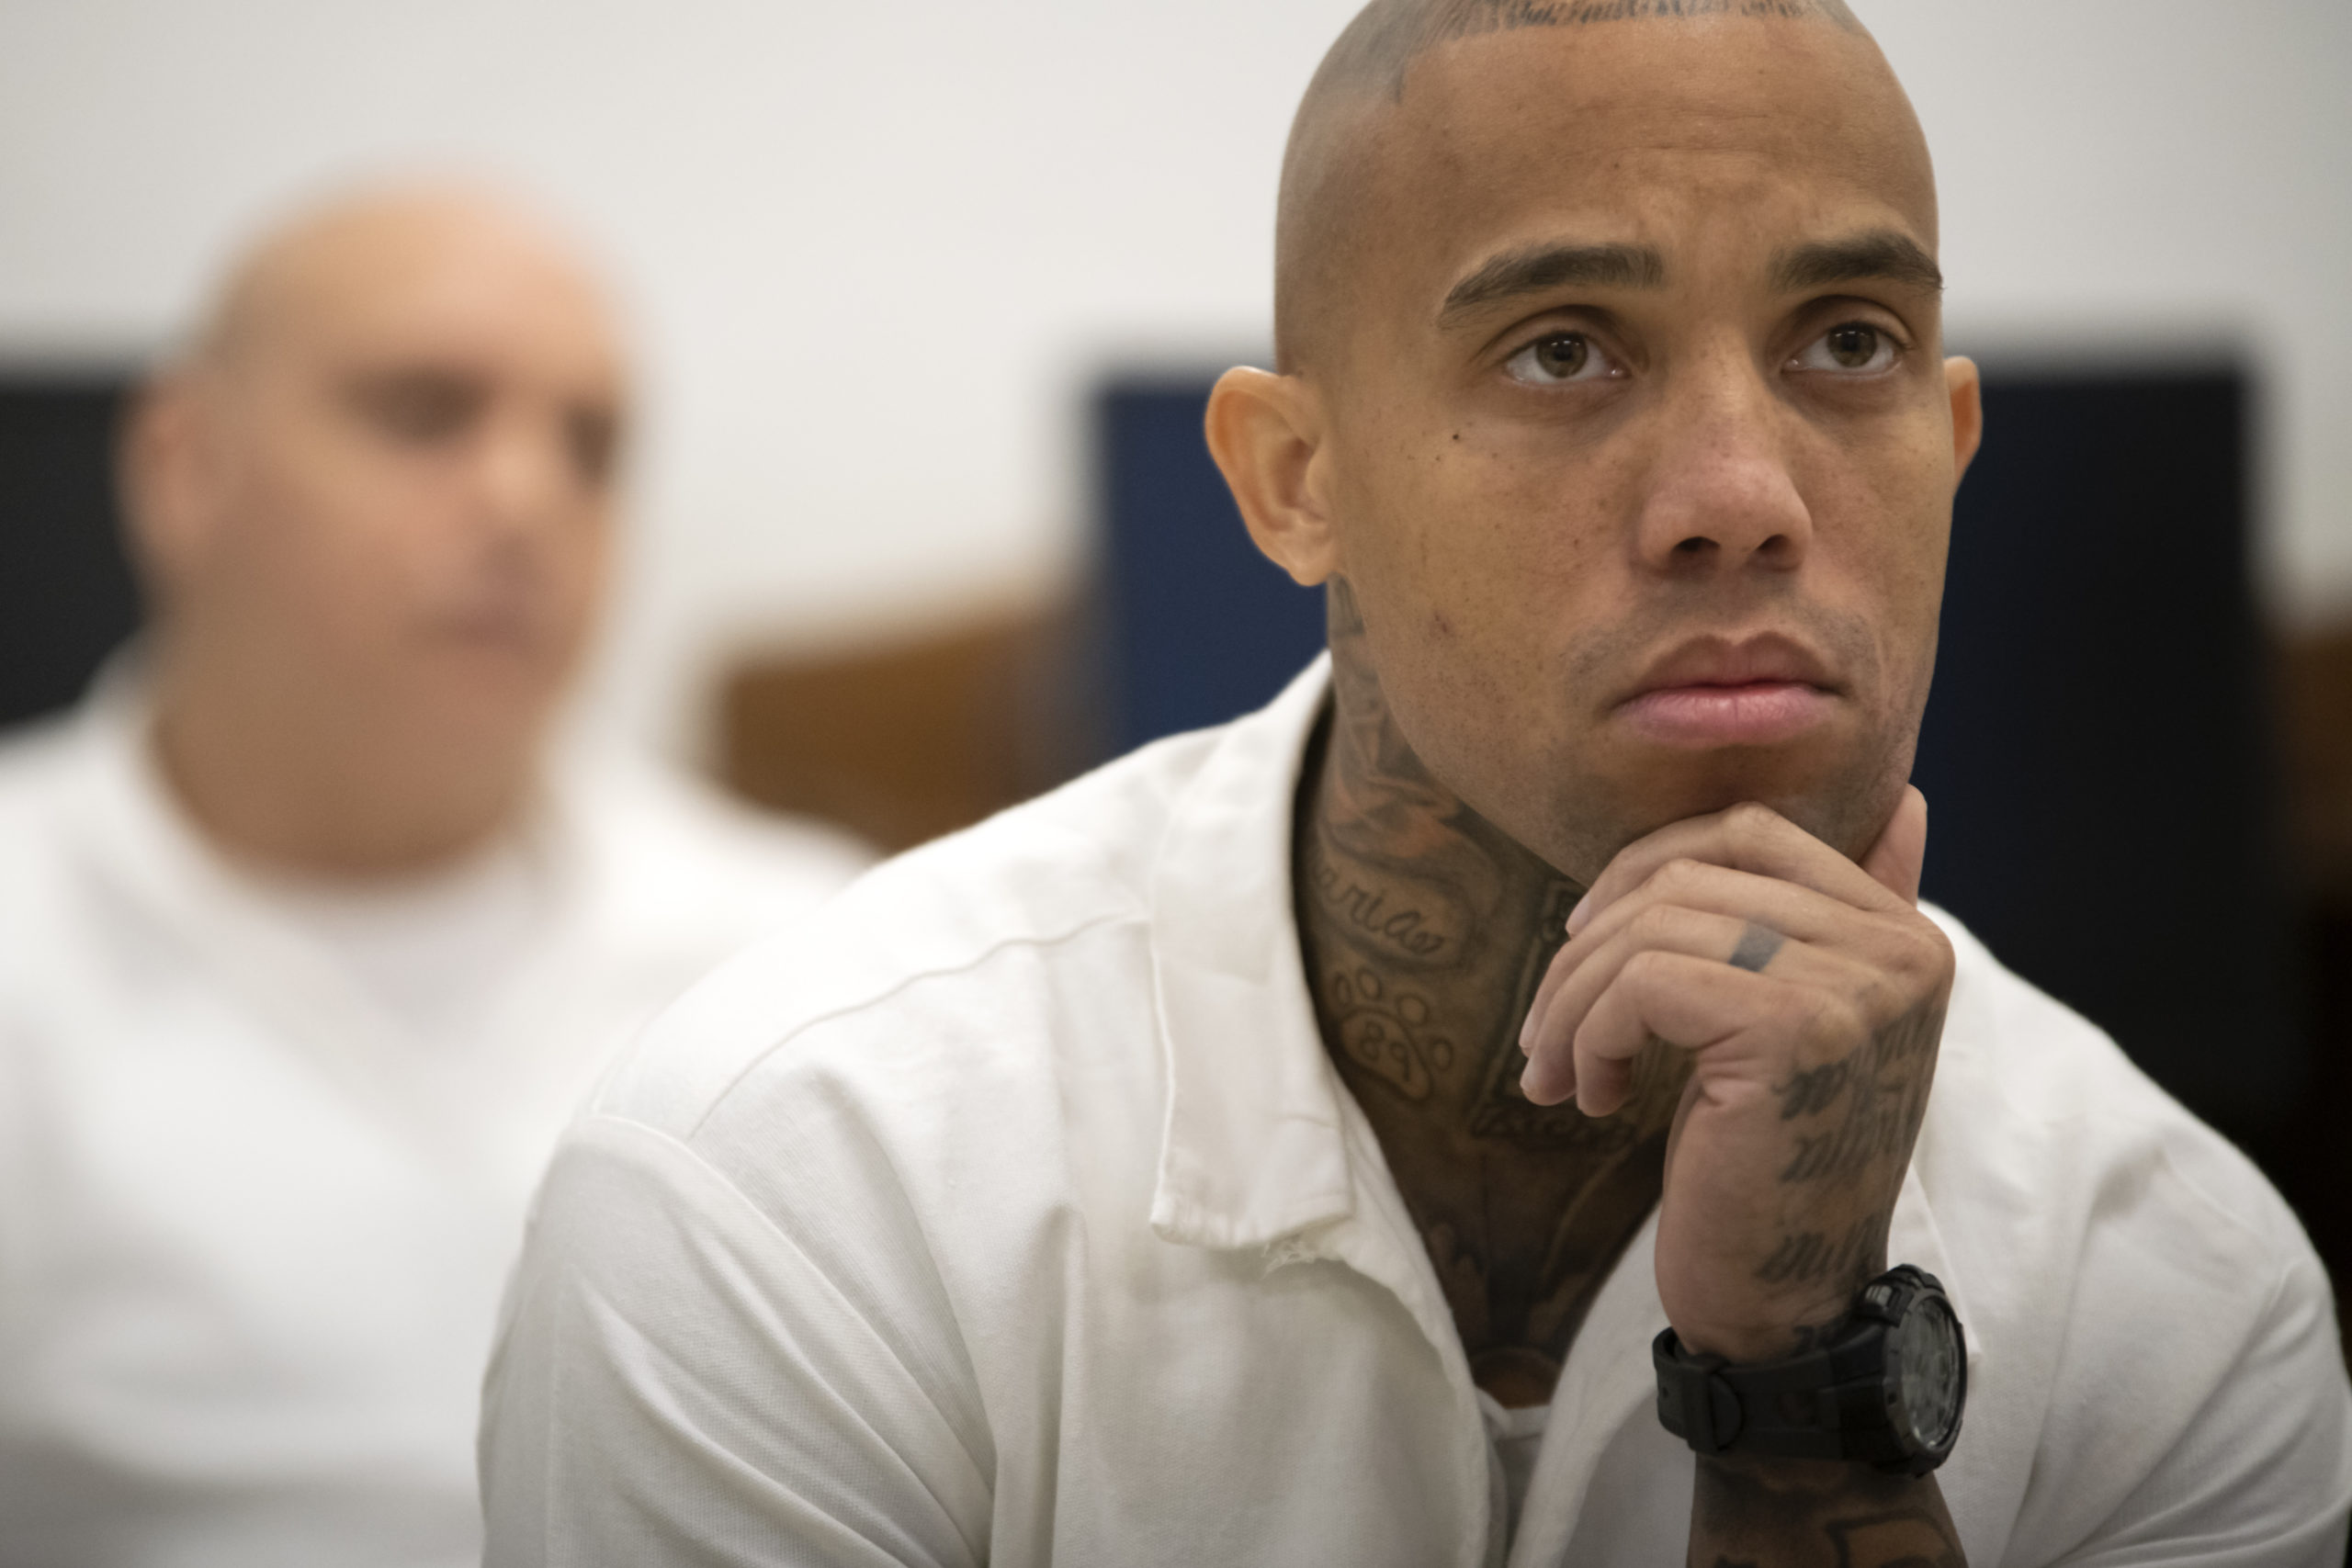 A bald, tattooed BIPOC man sits with his chin in hand, following along with a prison education class with rapt attention. He's wearing a watch and a white prison uniform shirt, and another prisoner is visible behind him.